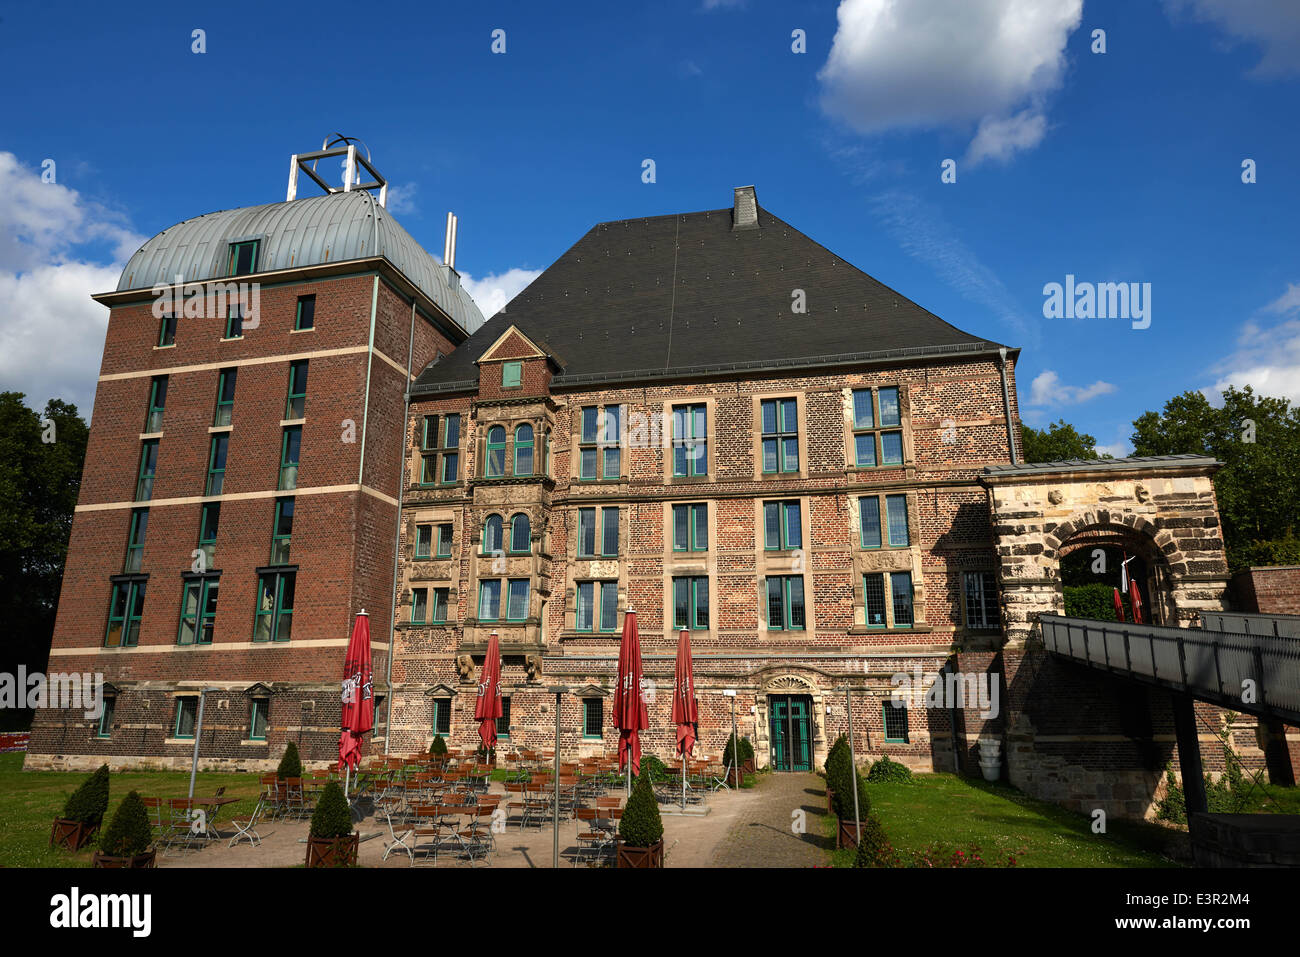 The Renaissance castle Schloss Horst in Gelsenkirchen, Schloss is considered to be the most important Renaissance building of the Ruhr area and is moreover one of the oldest and most significant Renaissance buildings of Westphalia. Photo: Bernd Thissen/dp Stock Photo